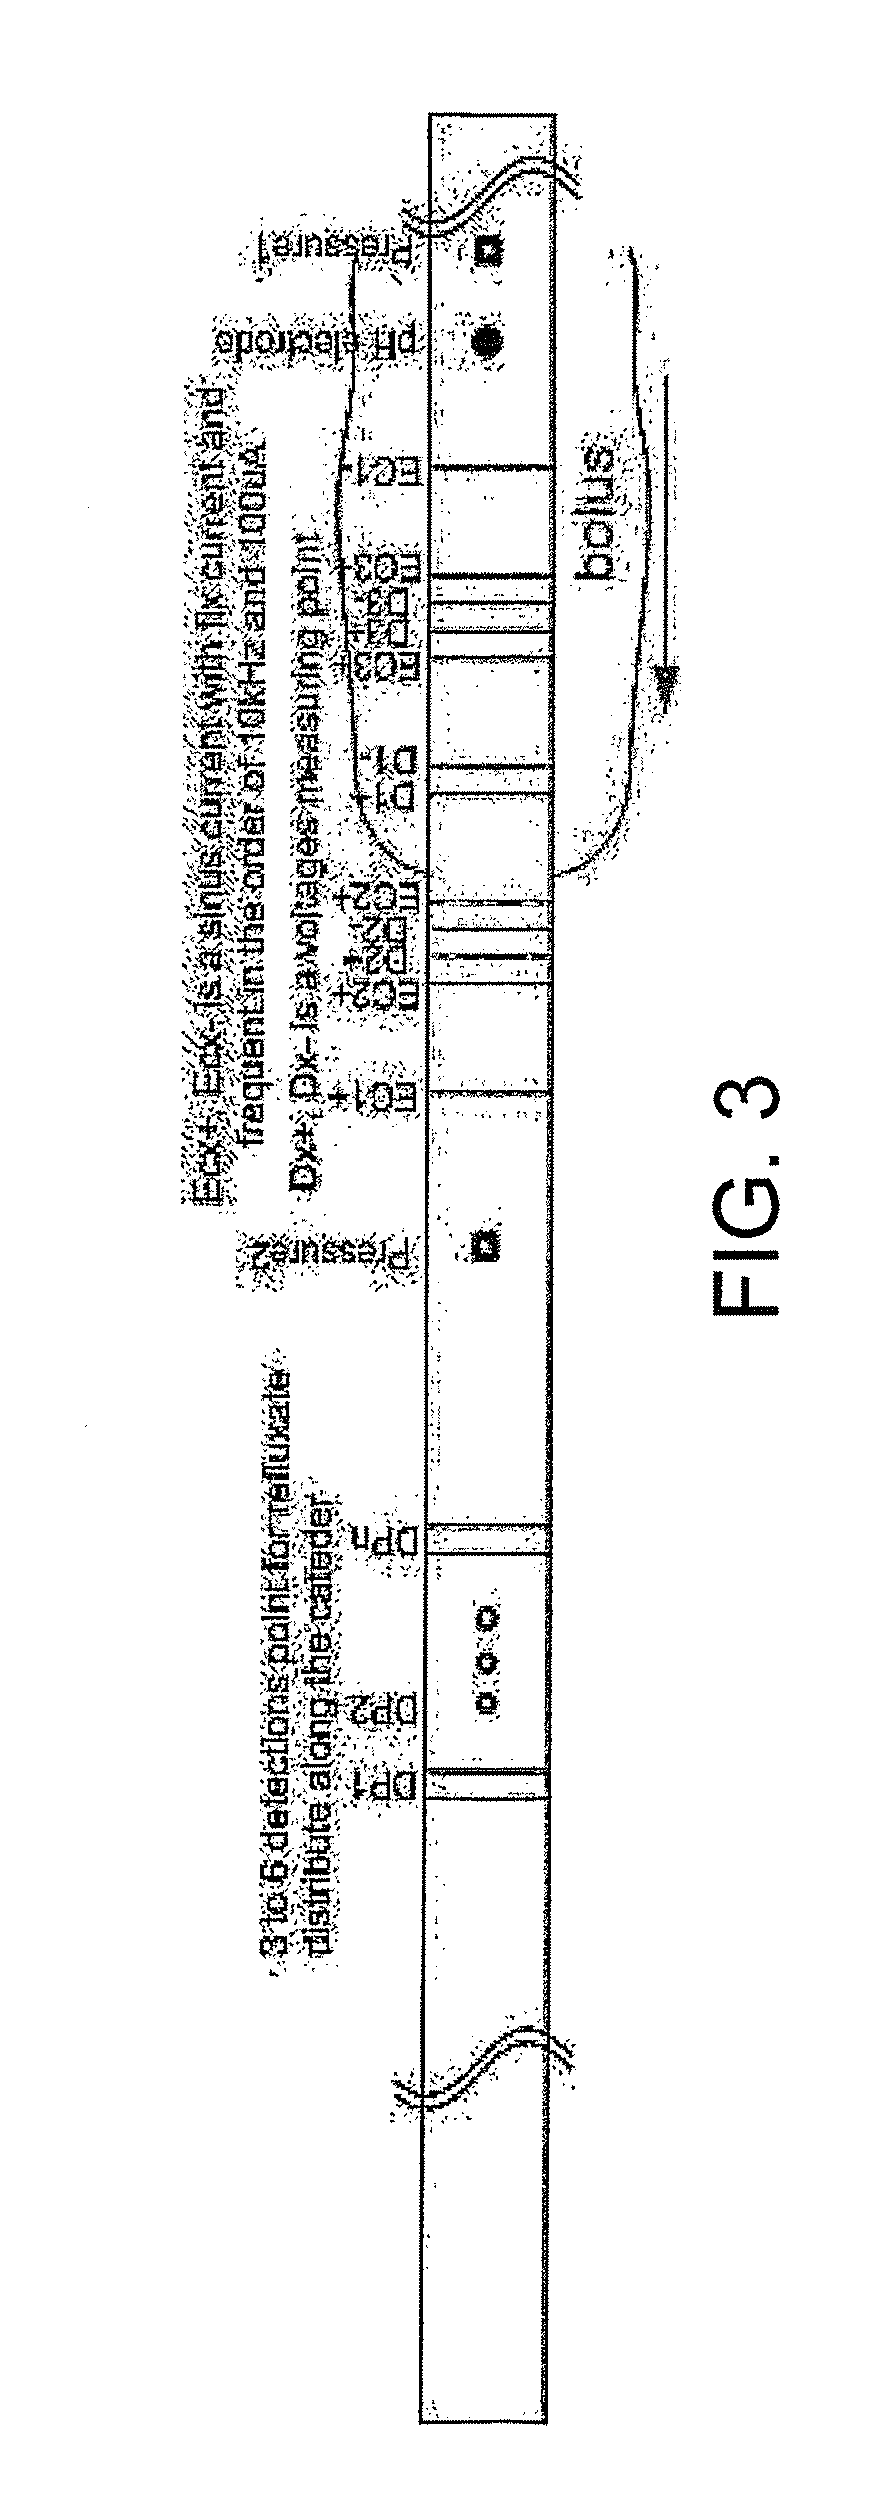 Apparatus and method for a global model of hollow internal organs including the determination of cross-sectional areas and volume in internal hollow organs and wall properties